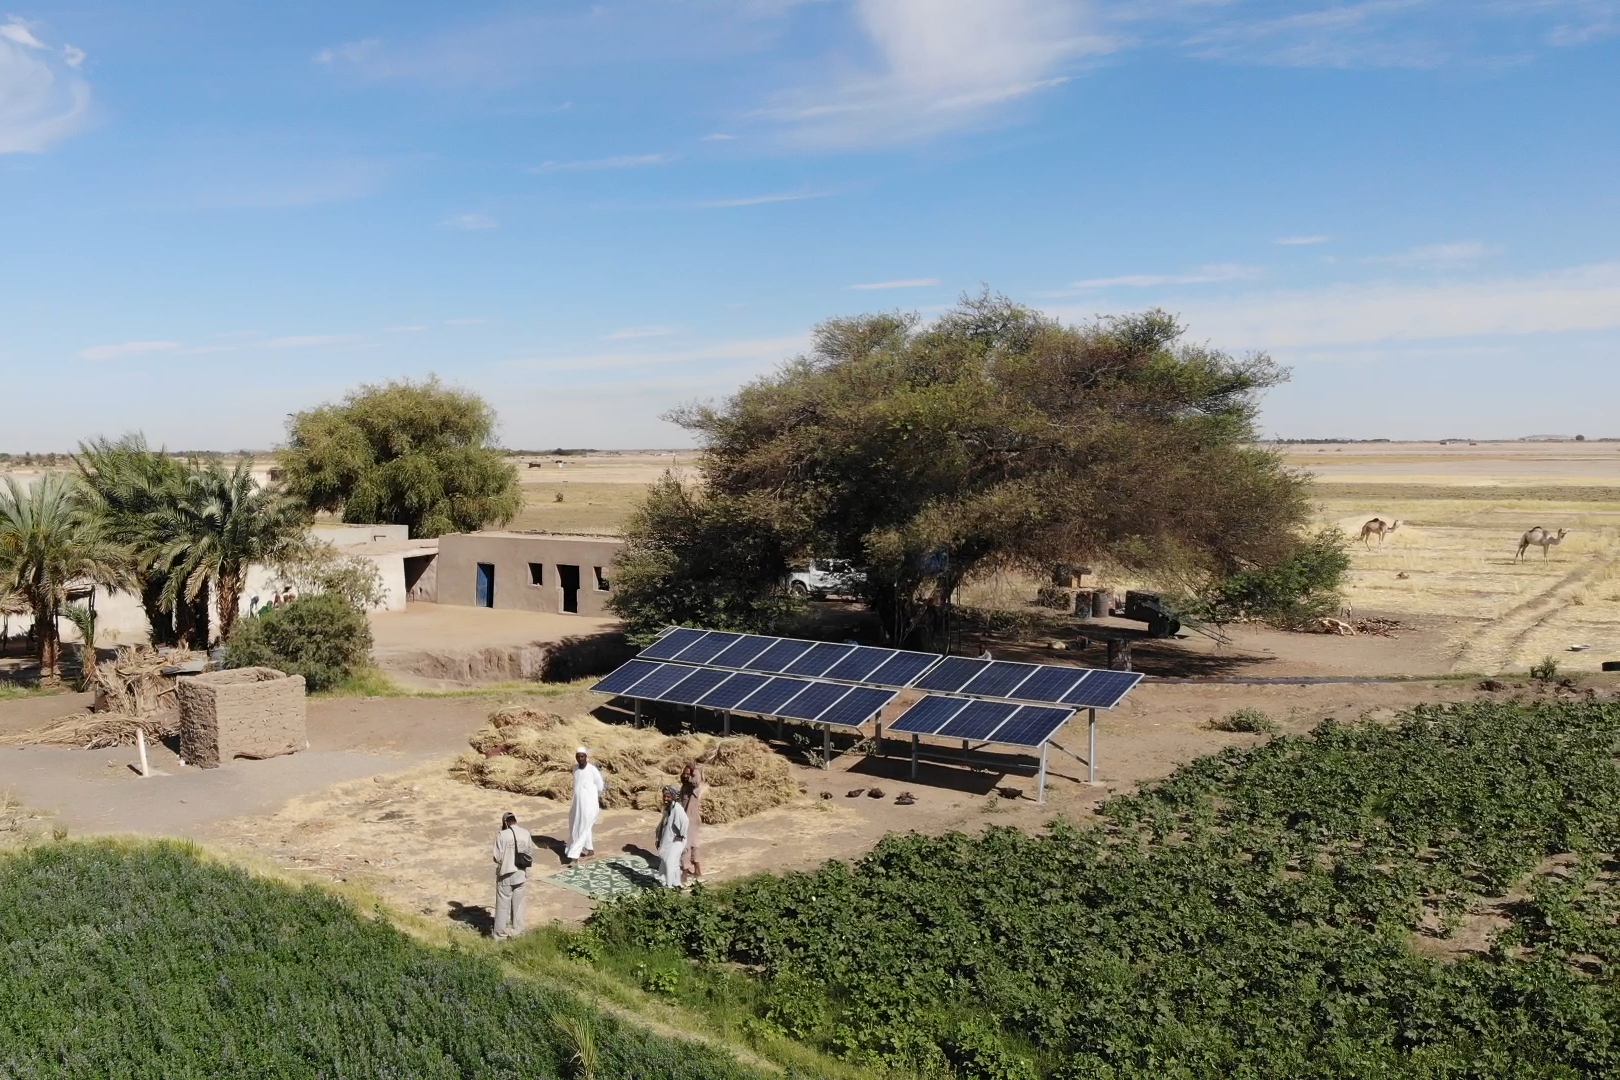 Solar panels for agriculture in Sudan